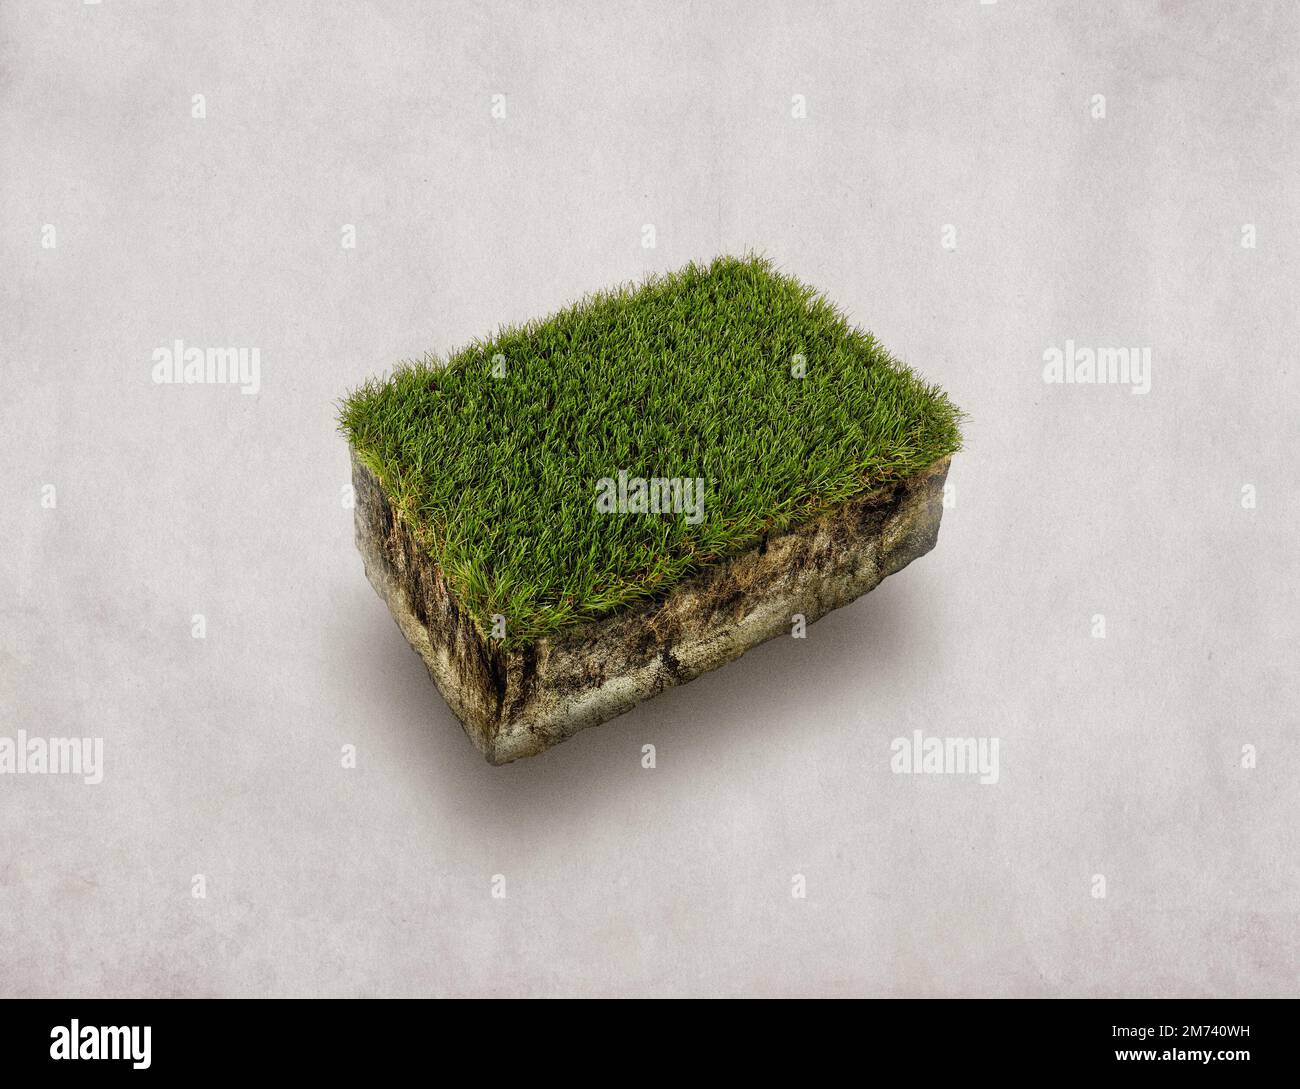 3D Isometric green grass, soil section isolated in light background Stock Photo